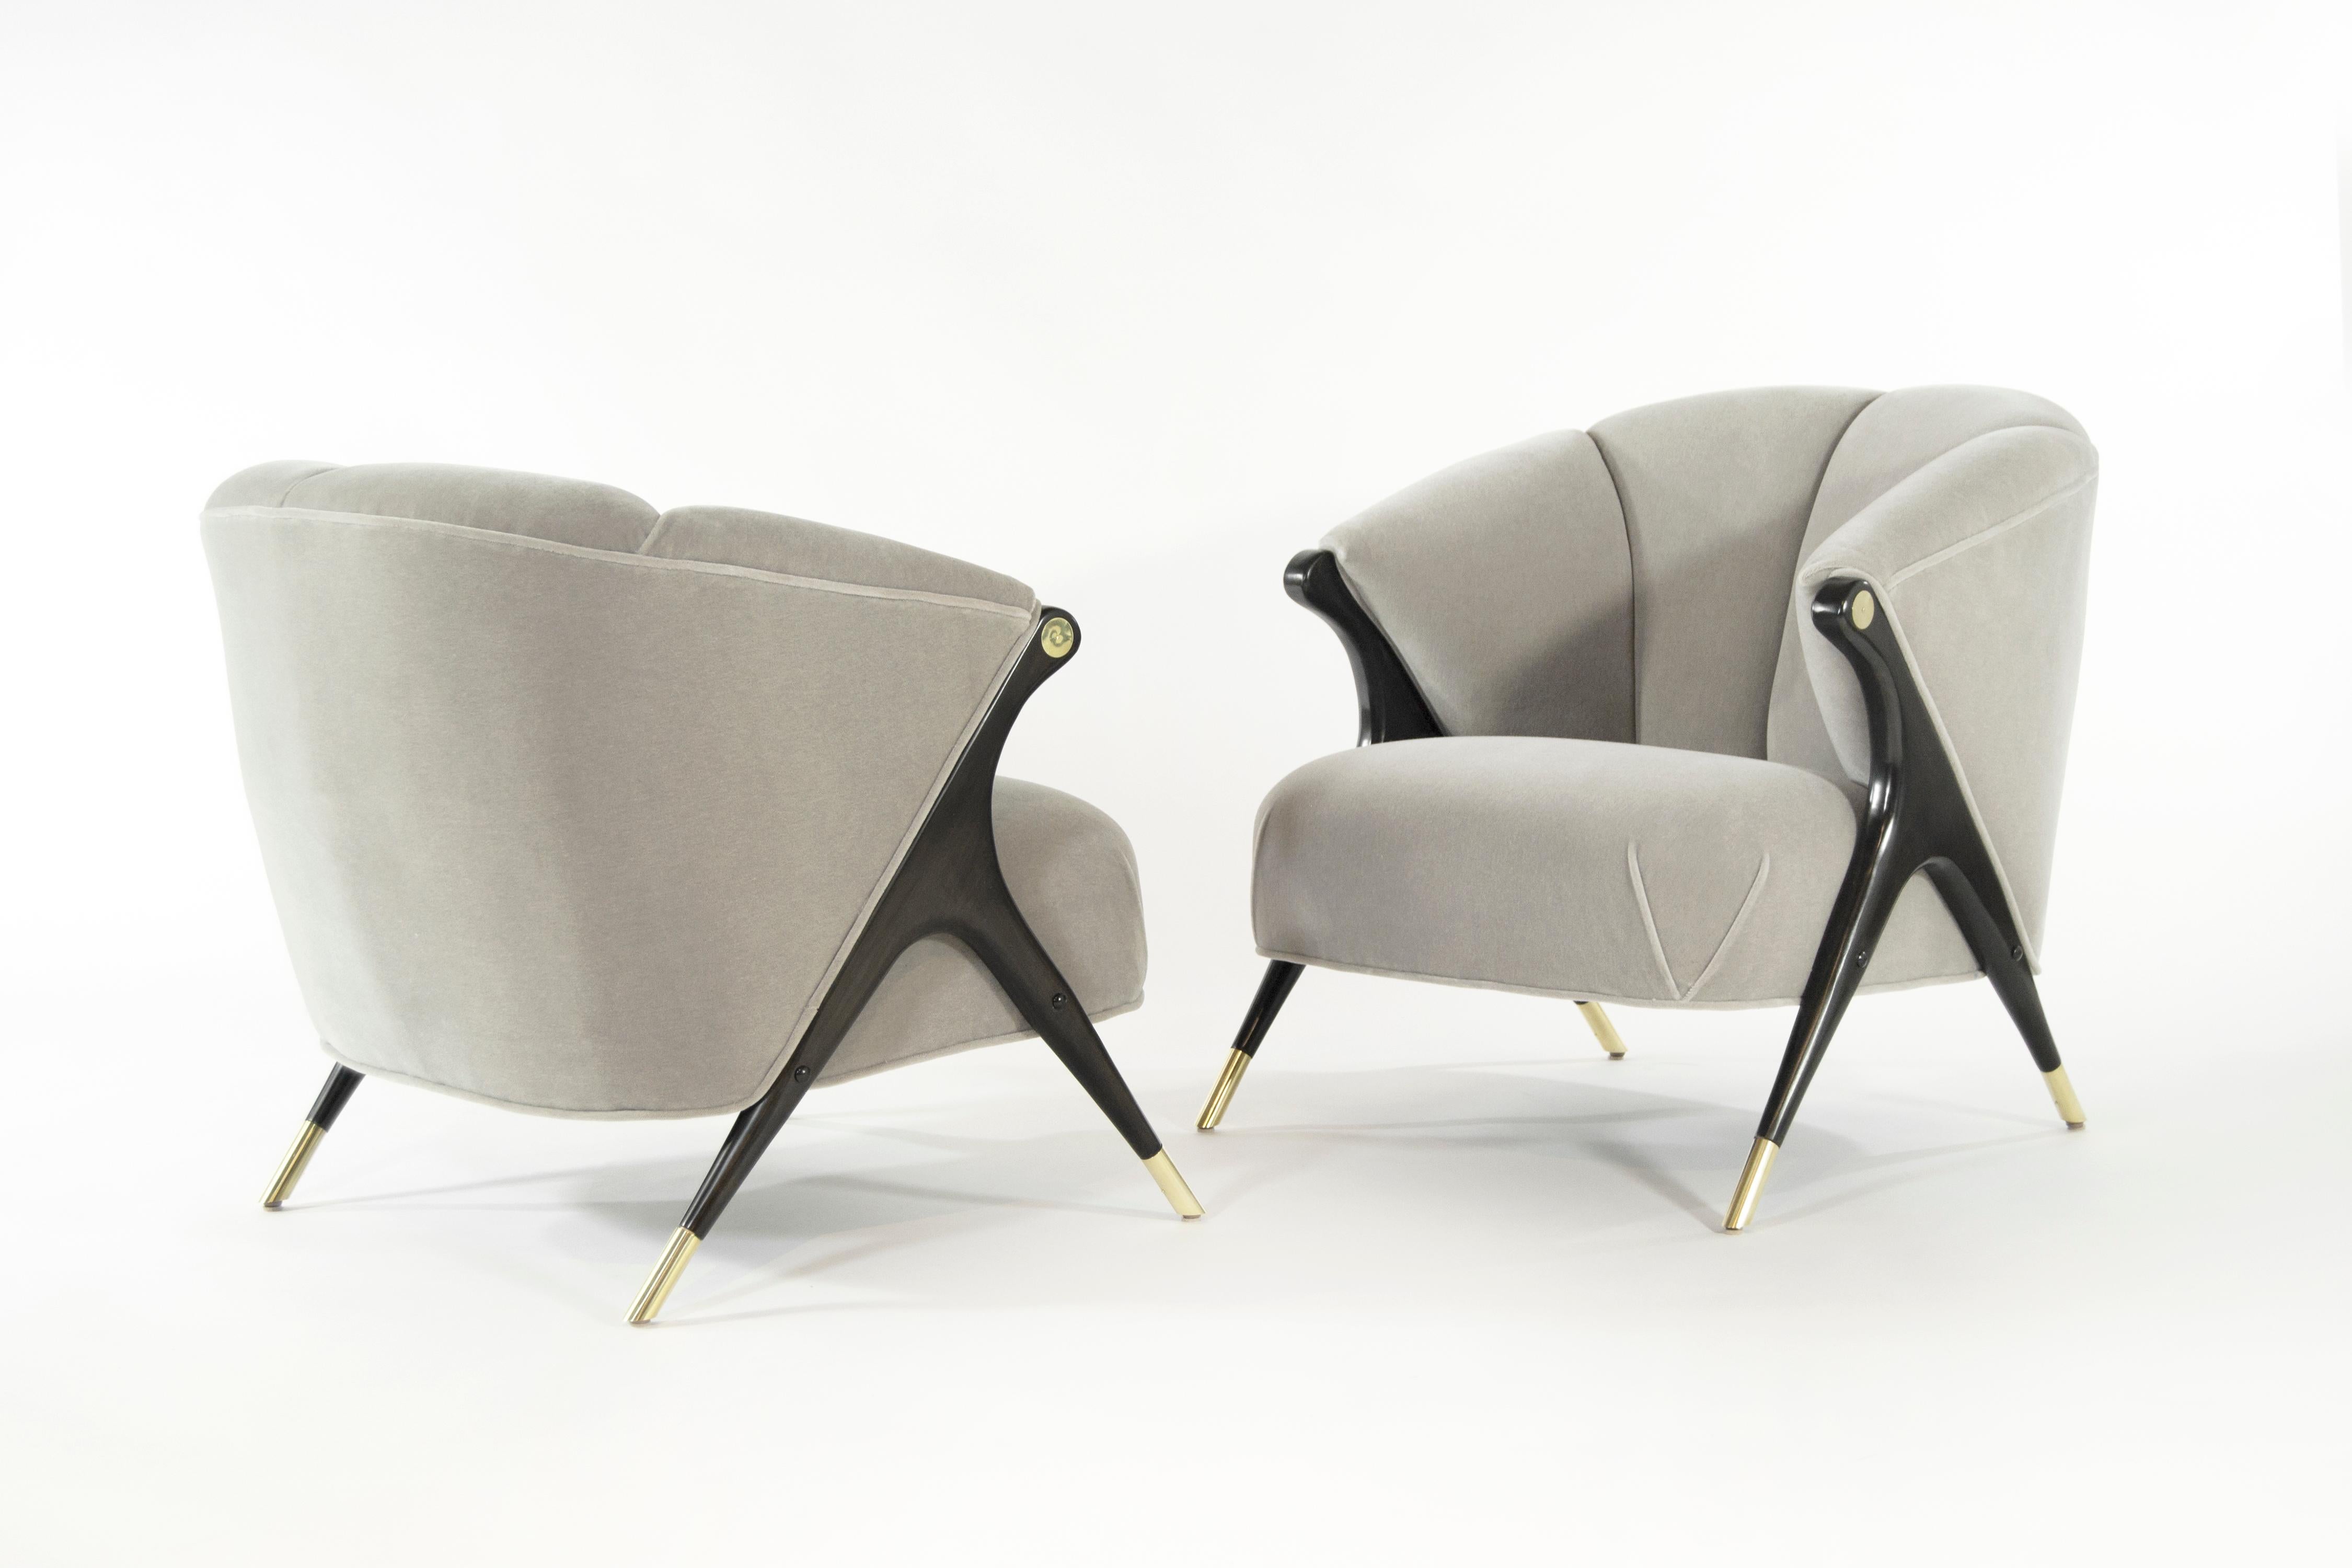 Stunning and rare pair of lounge chair by Karpen of California, circa 1950s.

Newly upholstered in grey alpaca velvet by Holly Hunt, sculptural maple legs newly restored to their original ebonized finish, newly polished brass sabots and arm